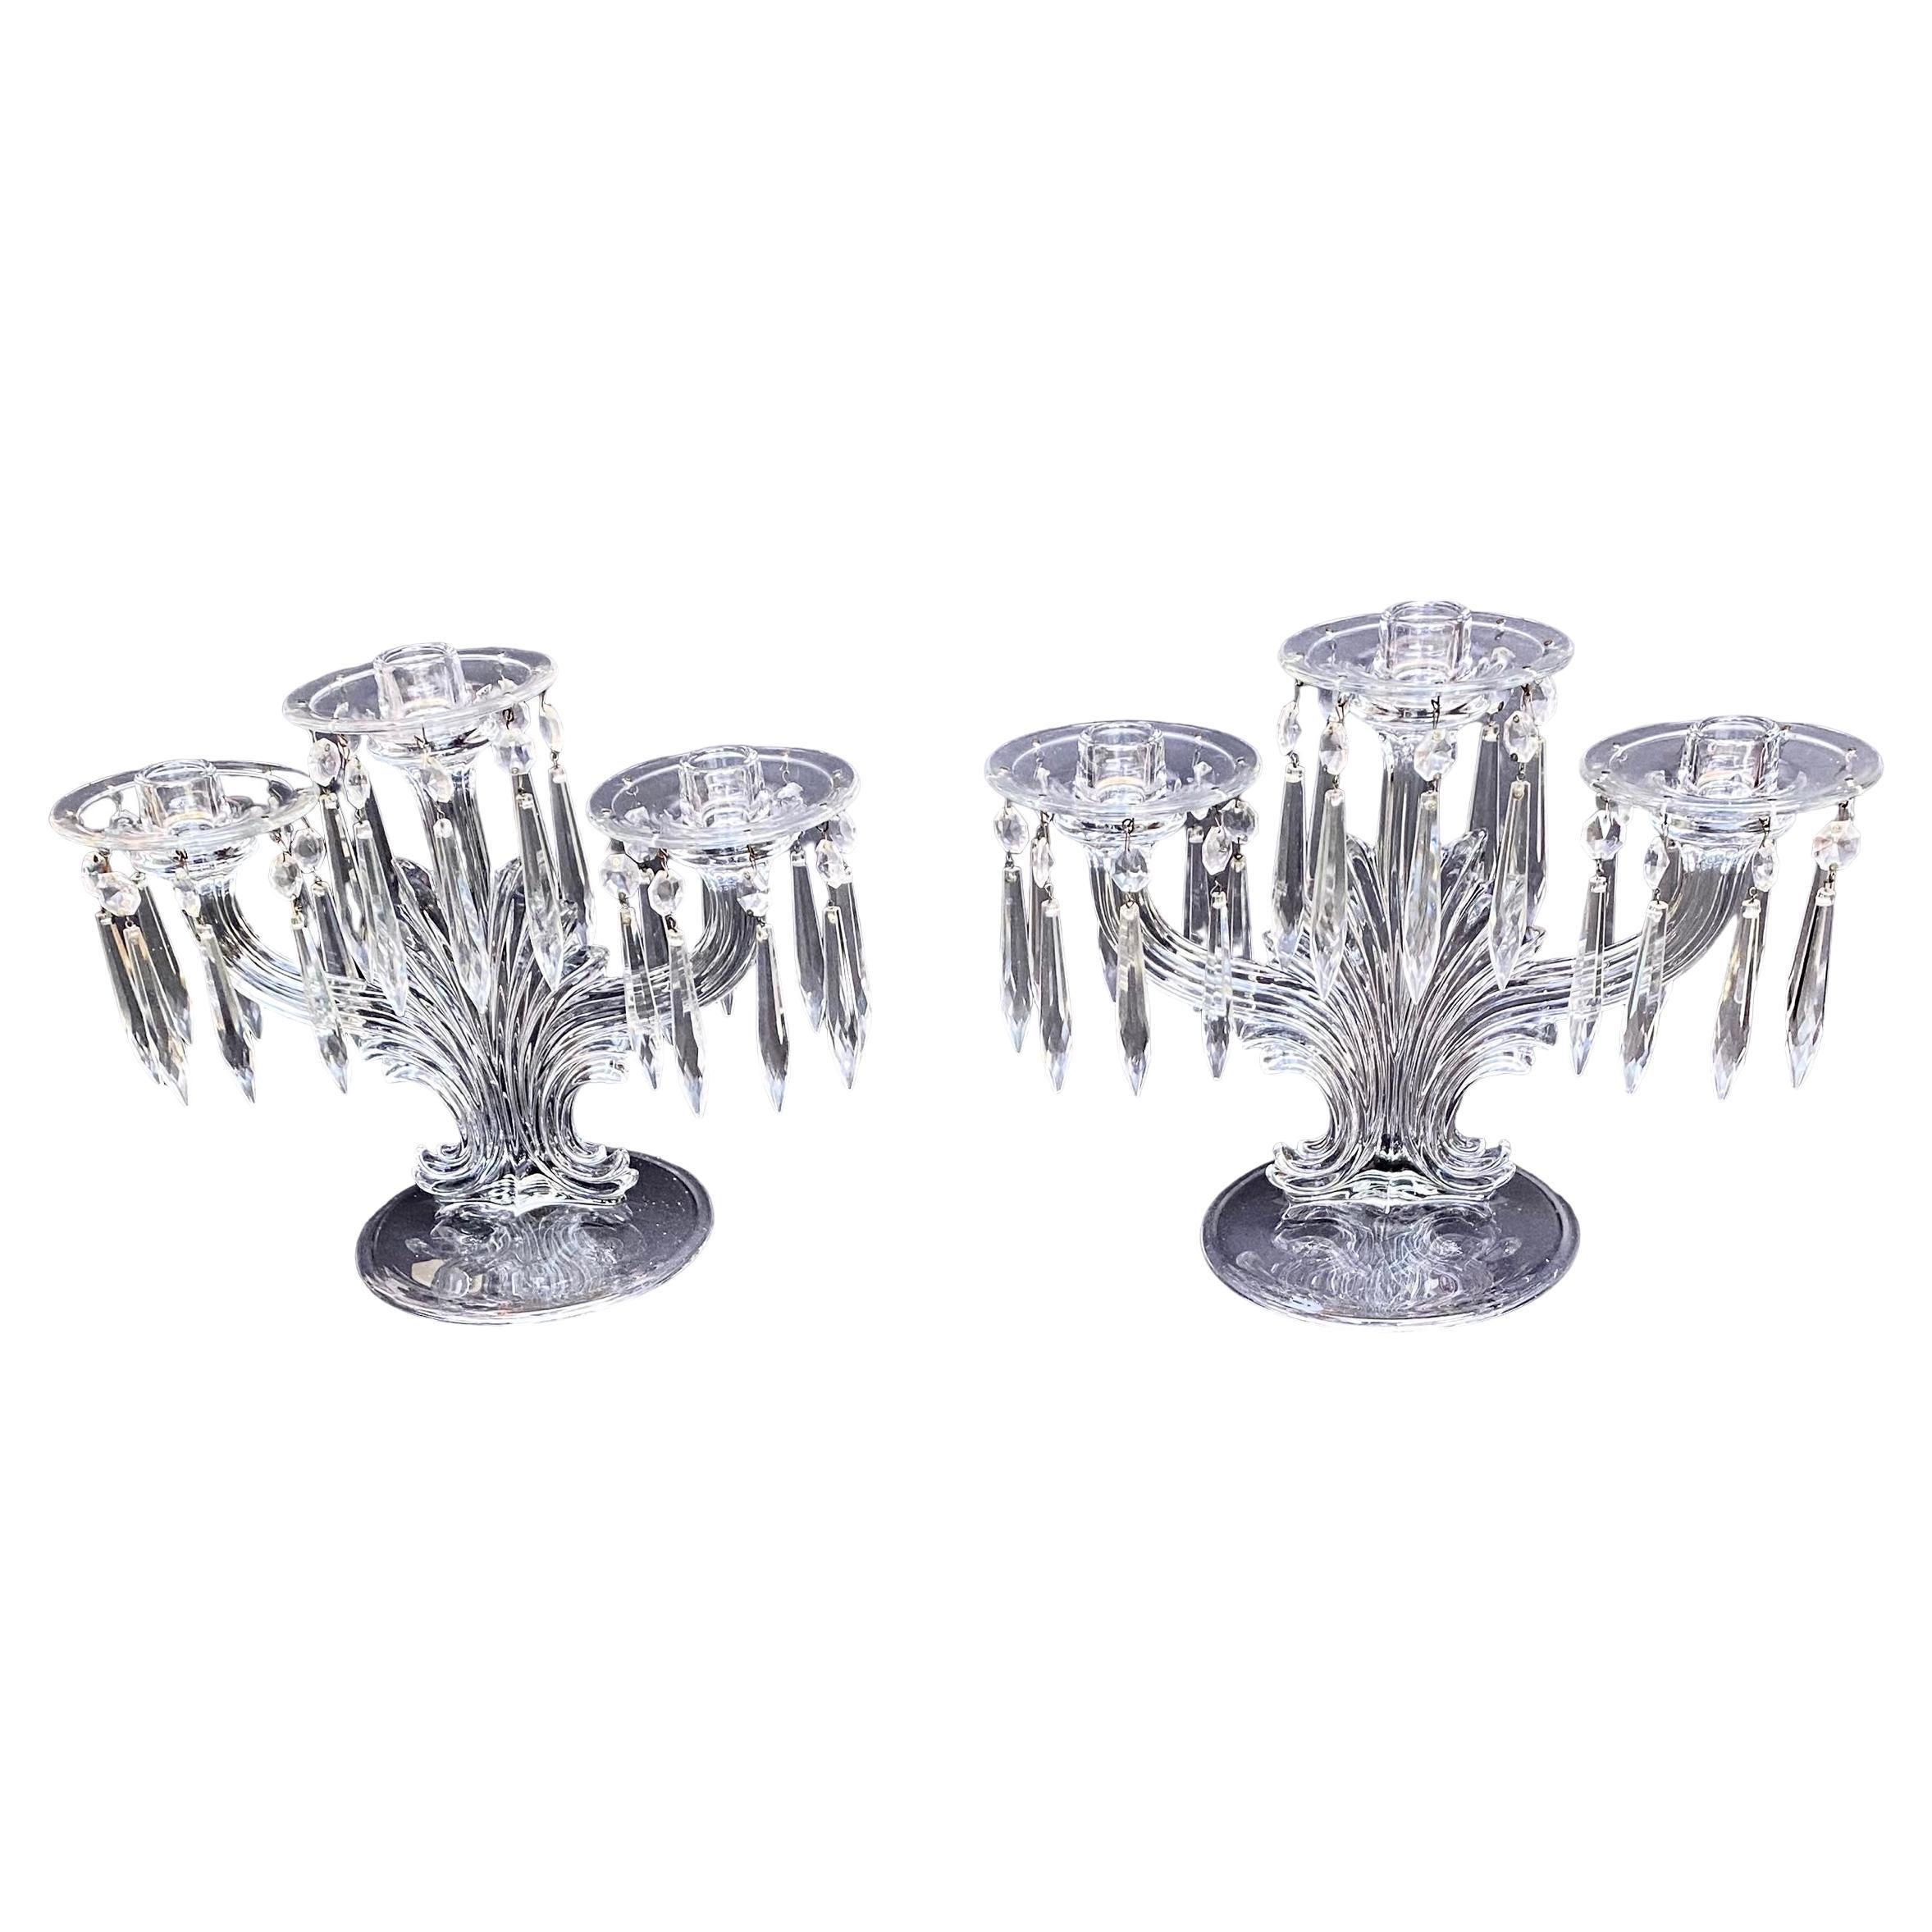 Pair of American Pressed Glass Three Light Candelabra, Early 20th C., on Swirled For Sale